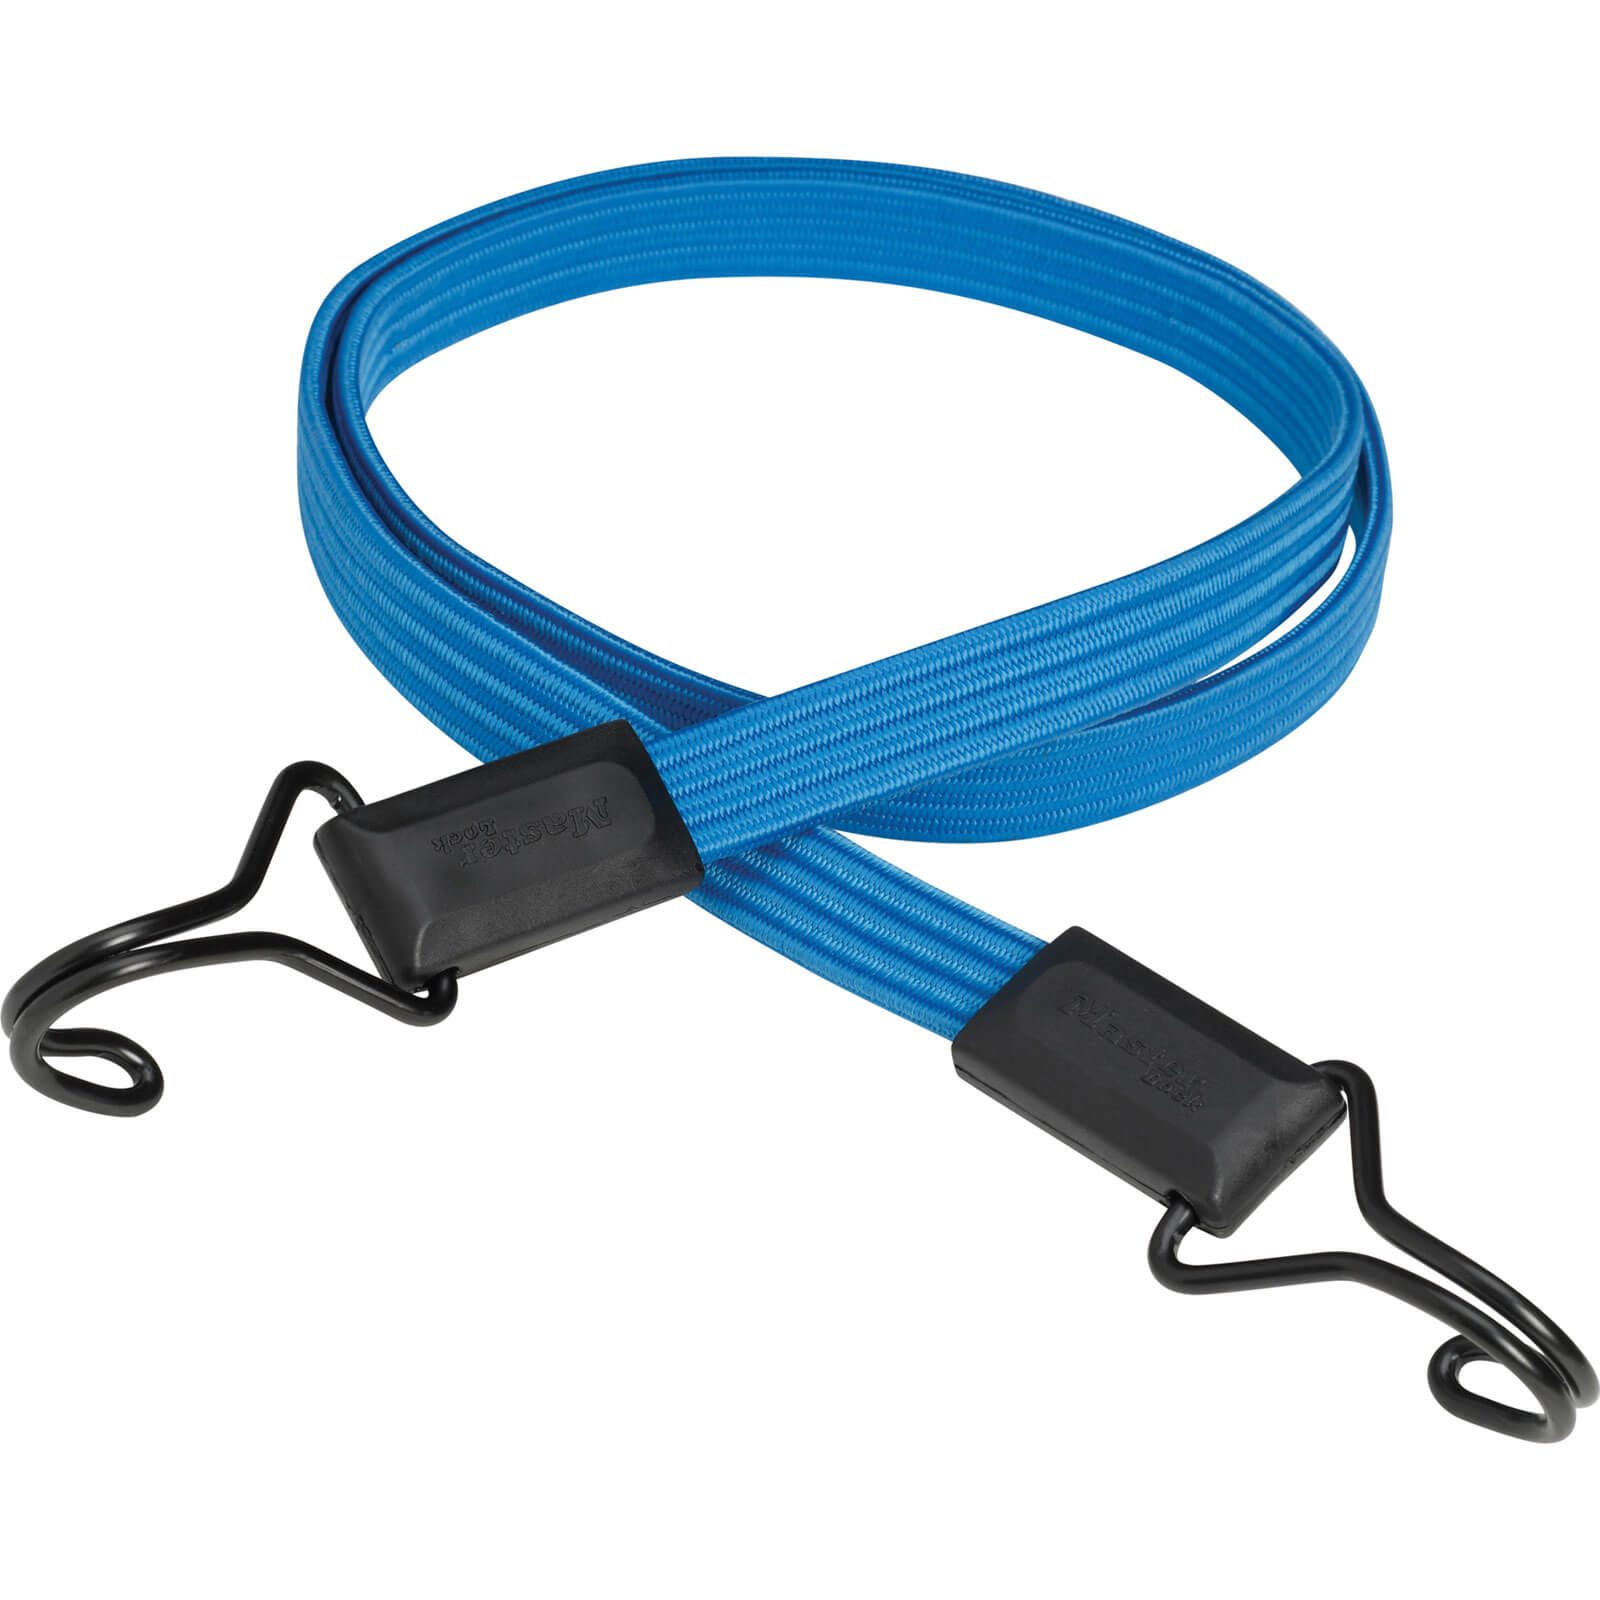 Image of Masterlock Double Hook Flat Bungee Cord 1200mm Blue Pack of 1